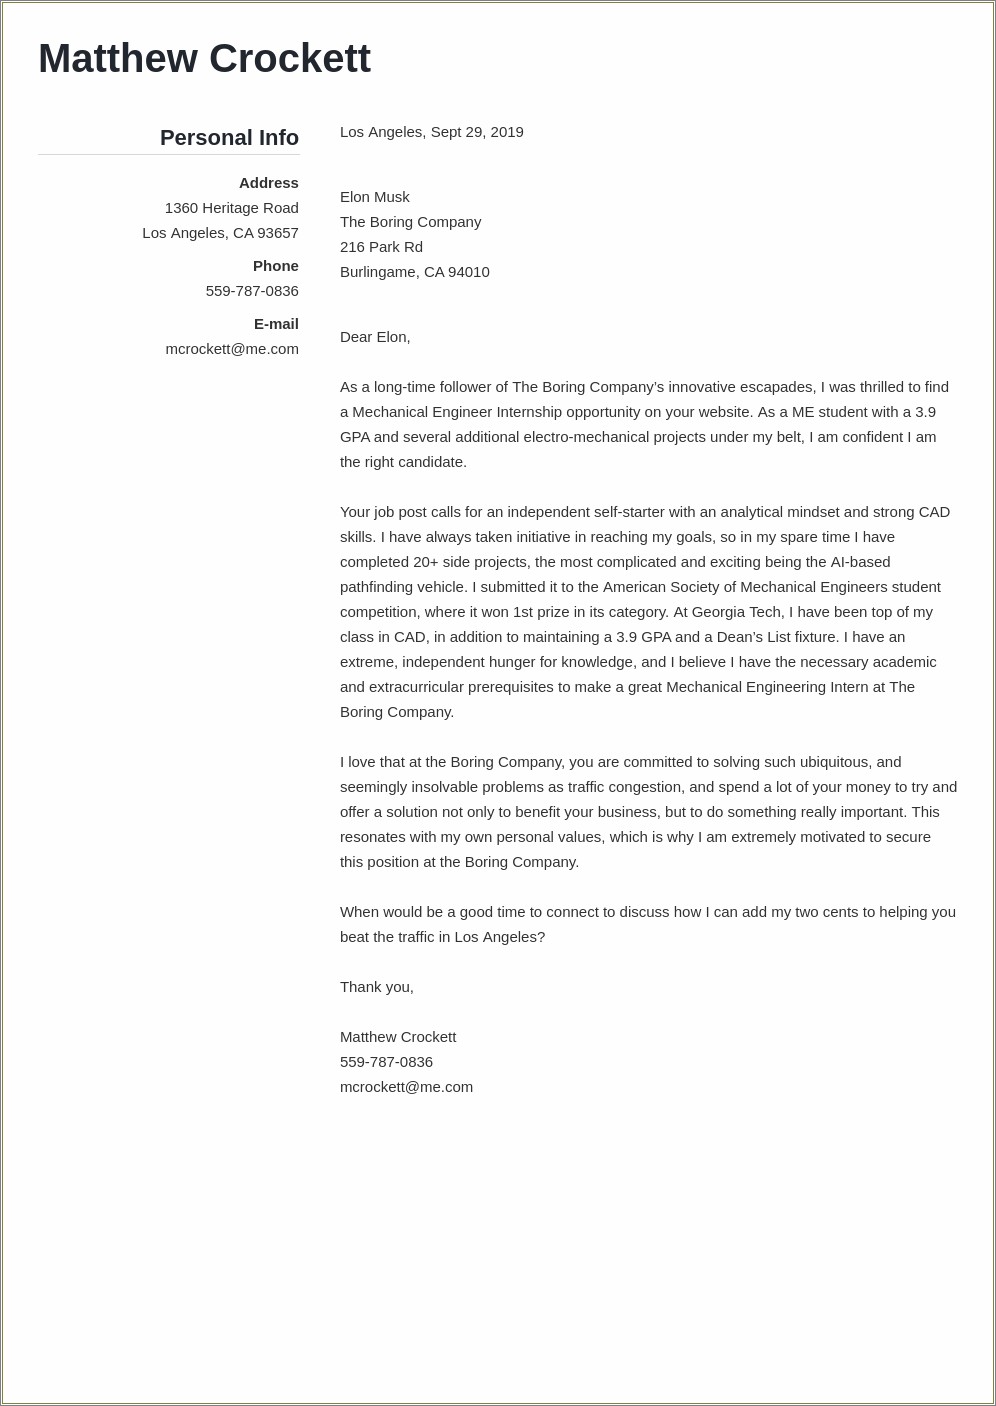 Resume Cover Letter Samples For Mechanical Engineers